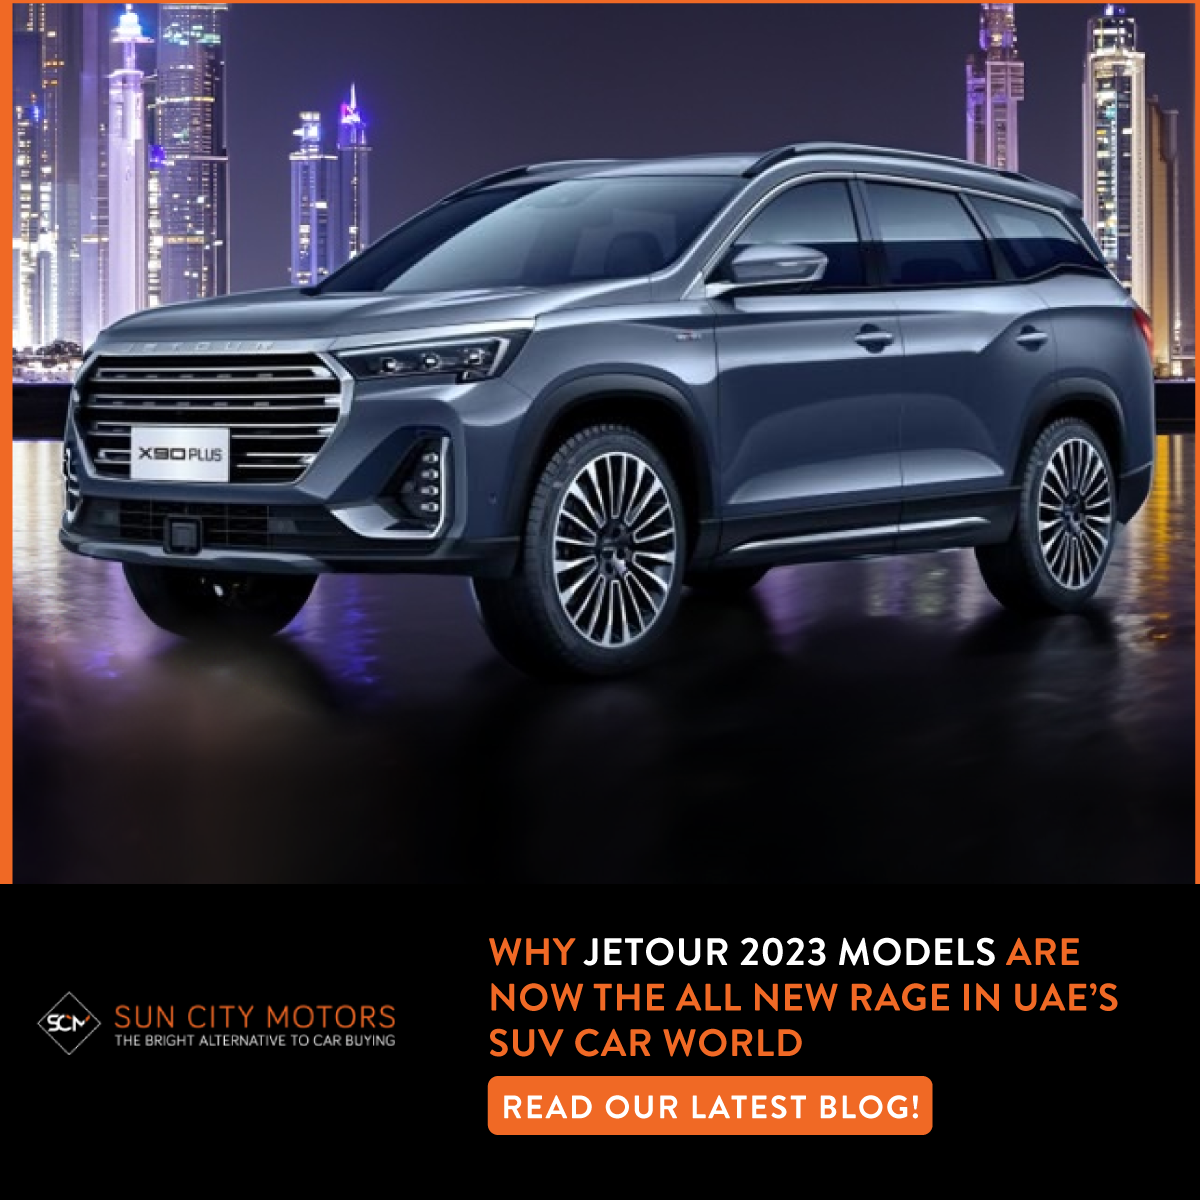 Why Jetour 2023 Models Are Now the All New Rage in UAE’s SUV Car World